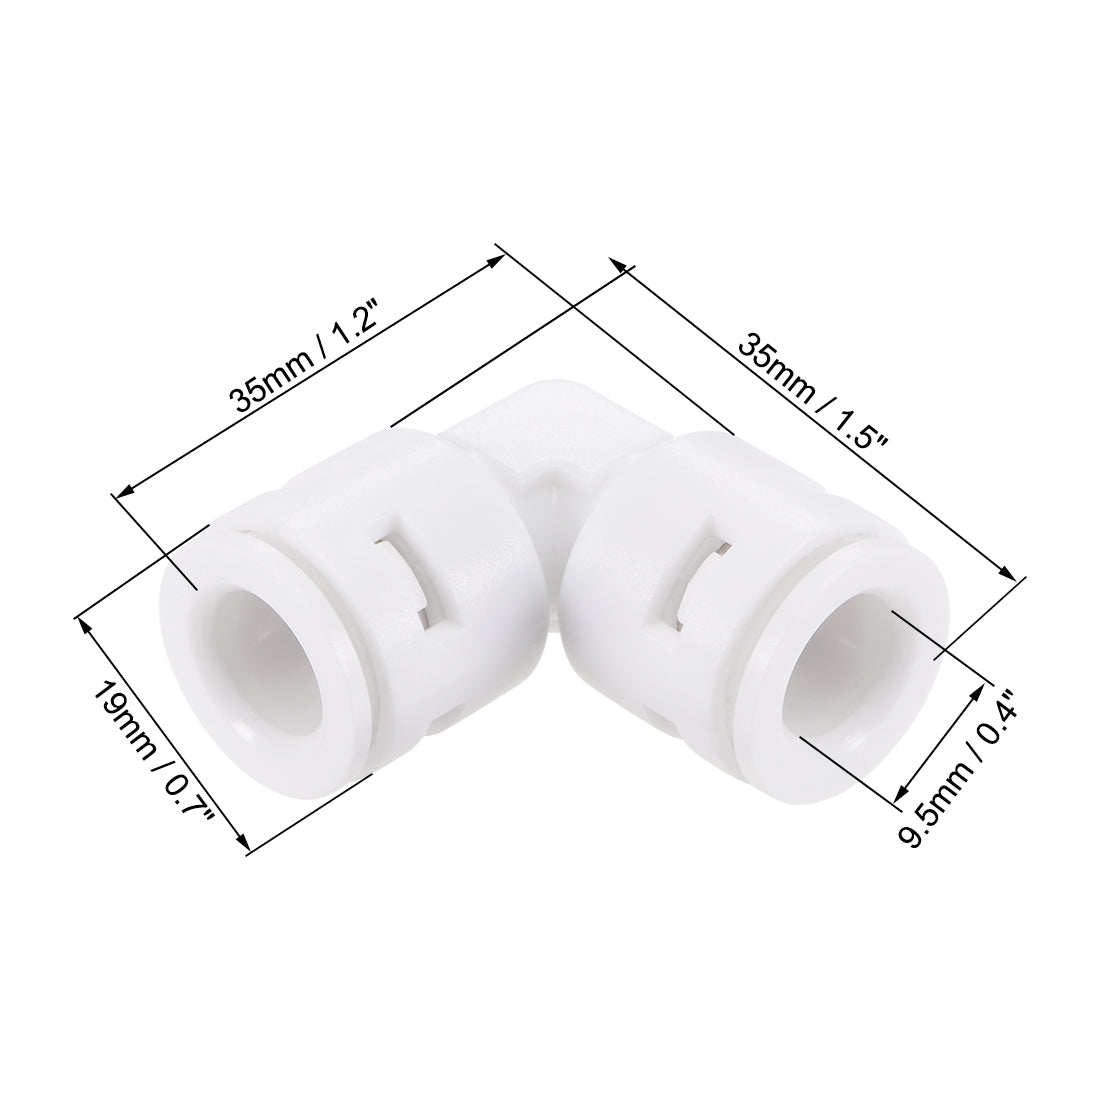 uxcell Uxcell Quick Connector L Type 3/8" to 3/8" Push Fit Elbow Connect Fittings for RO Water Purifier, 35x35mm White 10Pcs